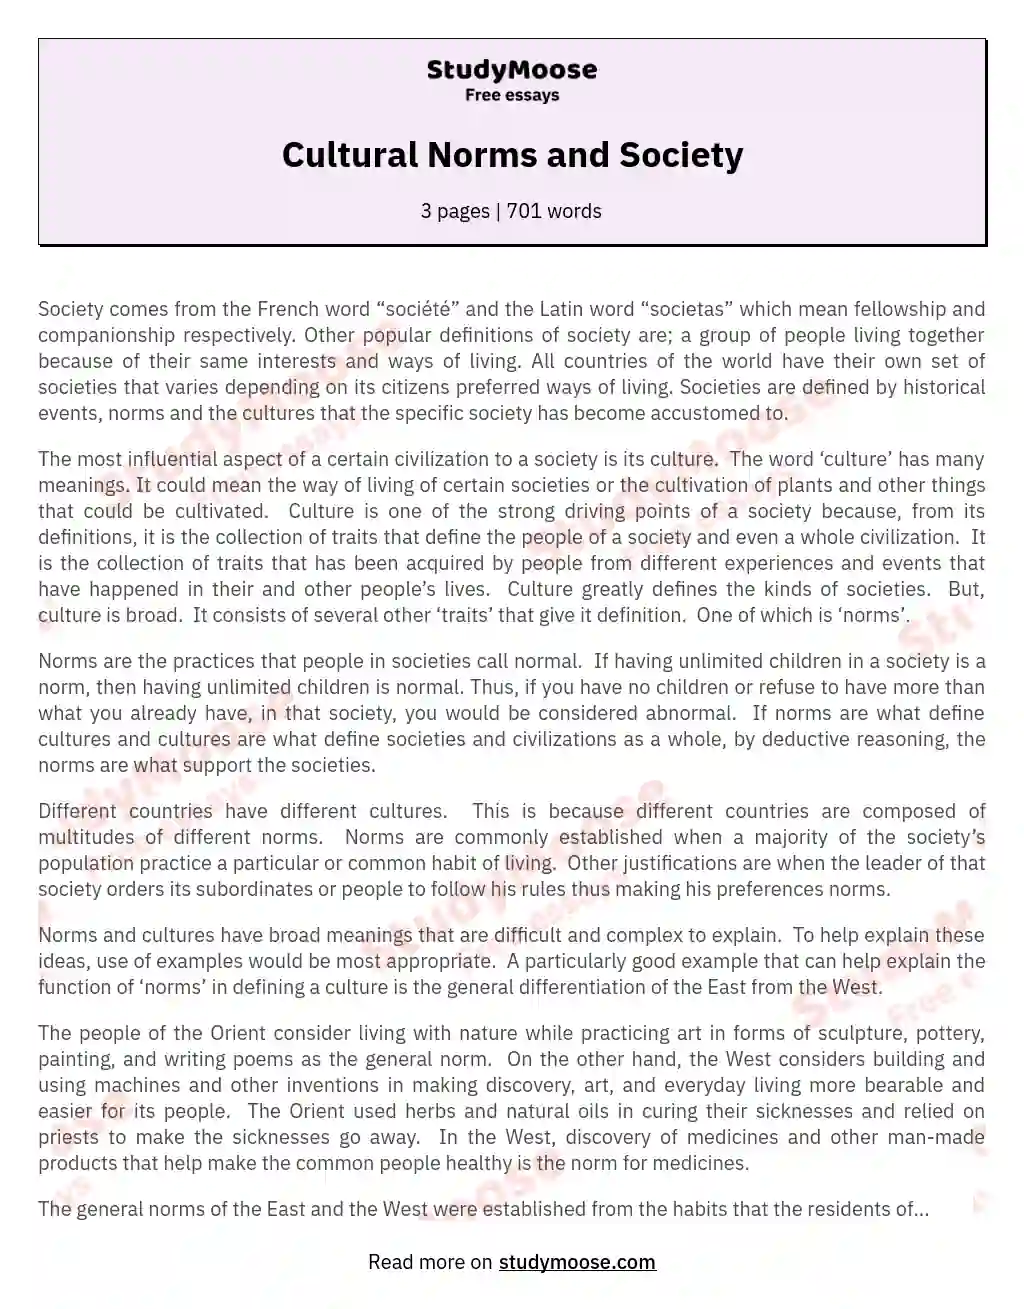 essay on cultural norms